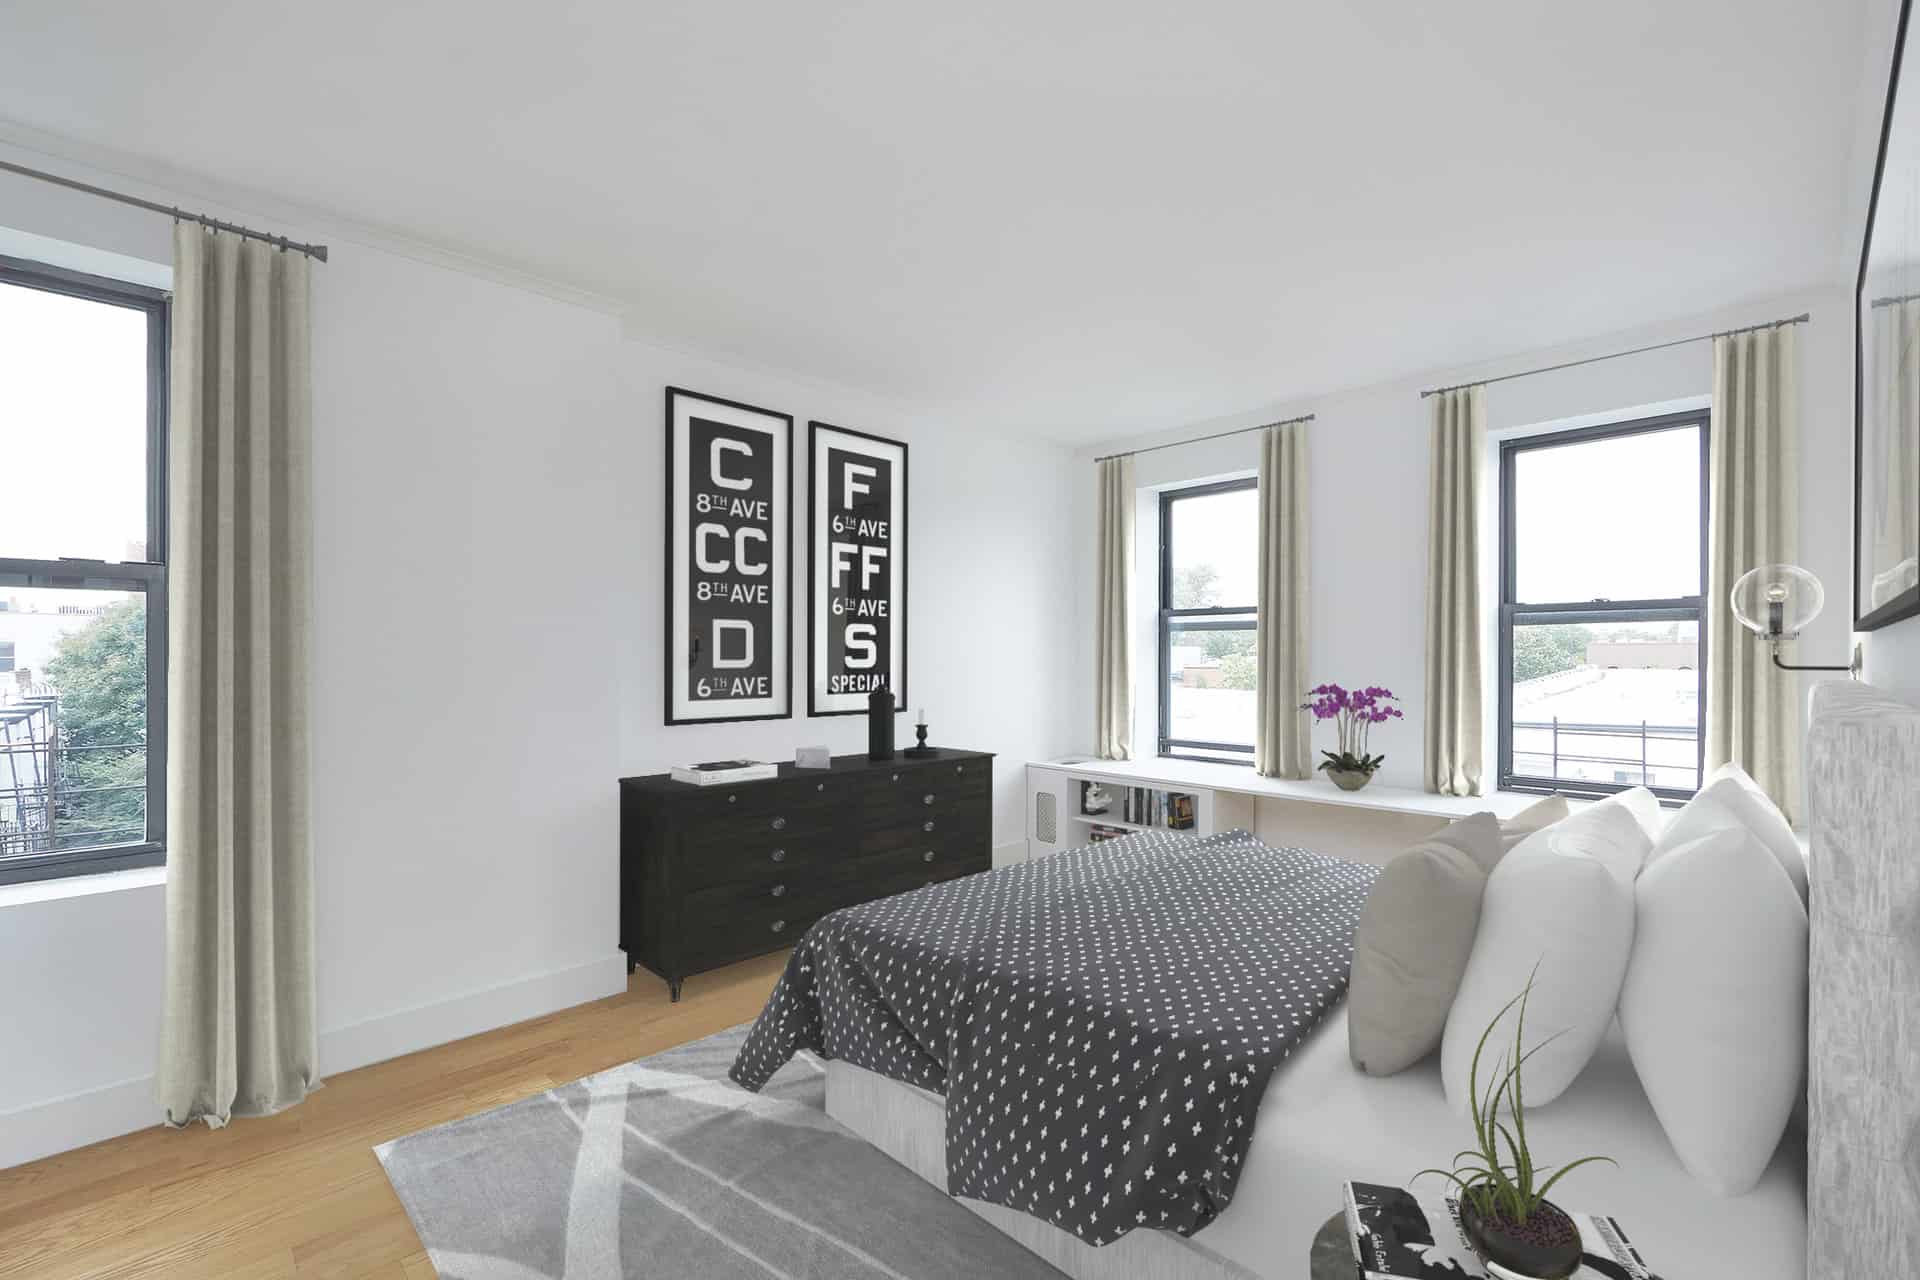 Bedroom at 457 15th Street apartments in Brooklyn with a queen size bed, built-in shelving, natural light & hardwood floors.